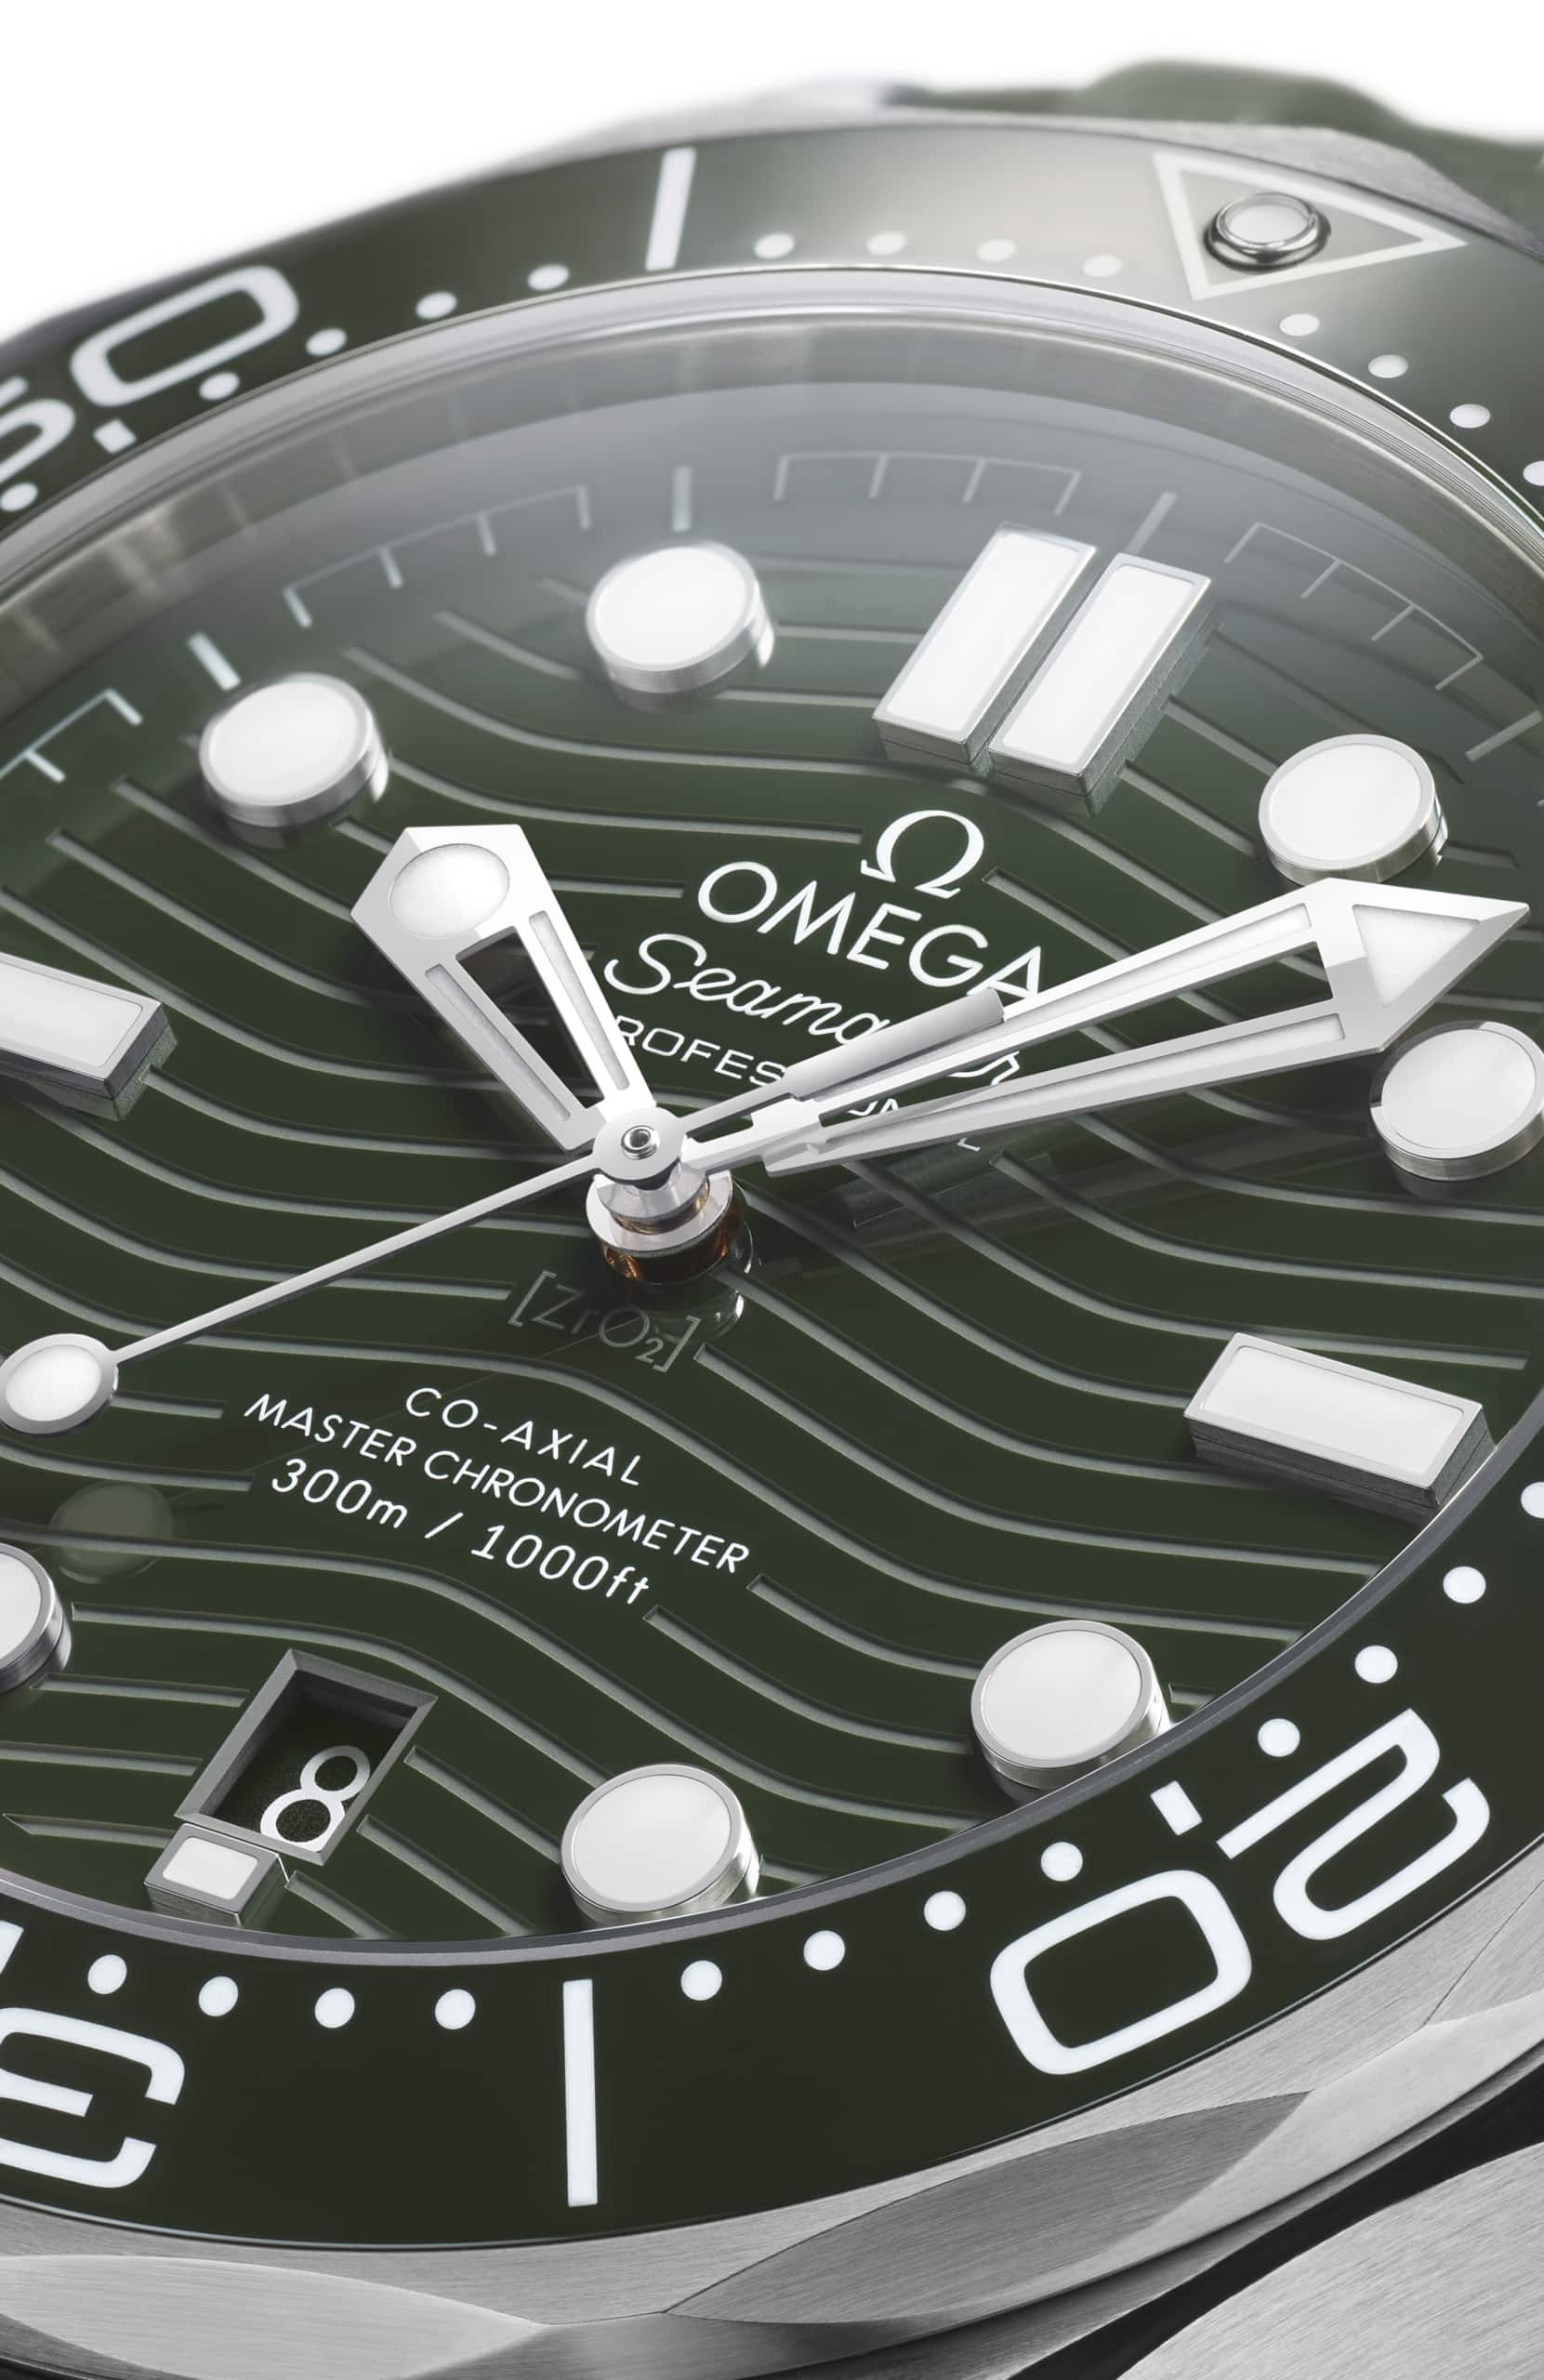 F】 Hands-On: The Green Omega Seamaster Professional 300M